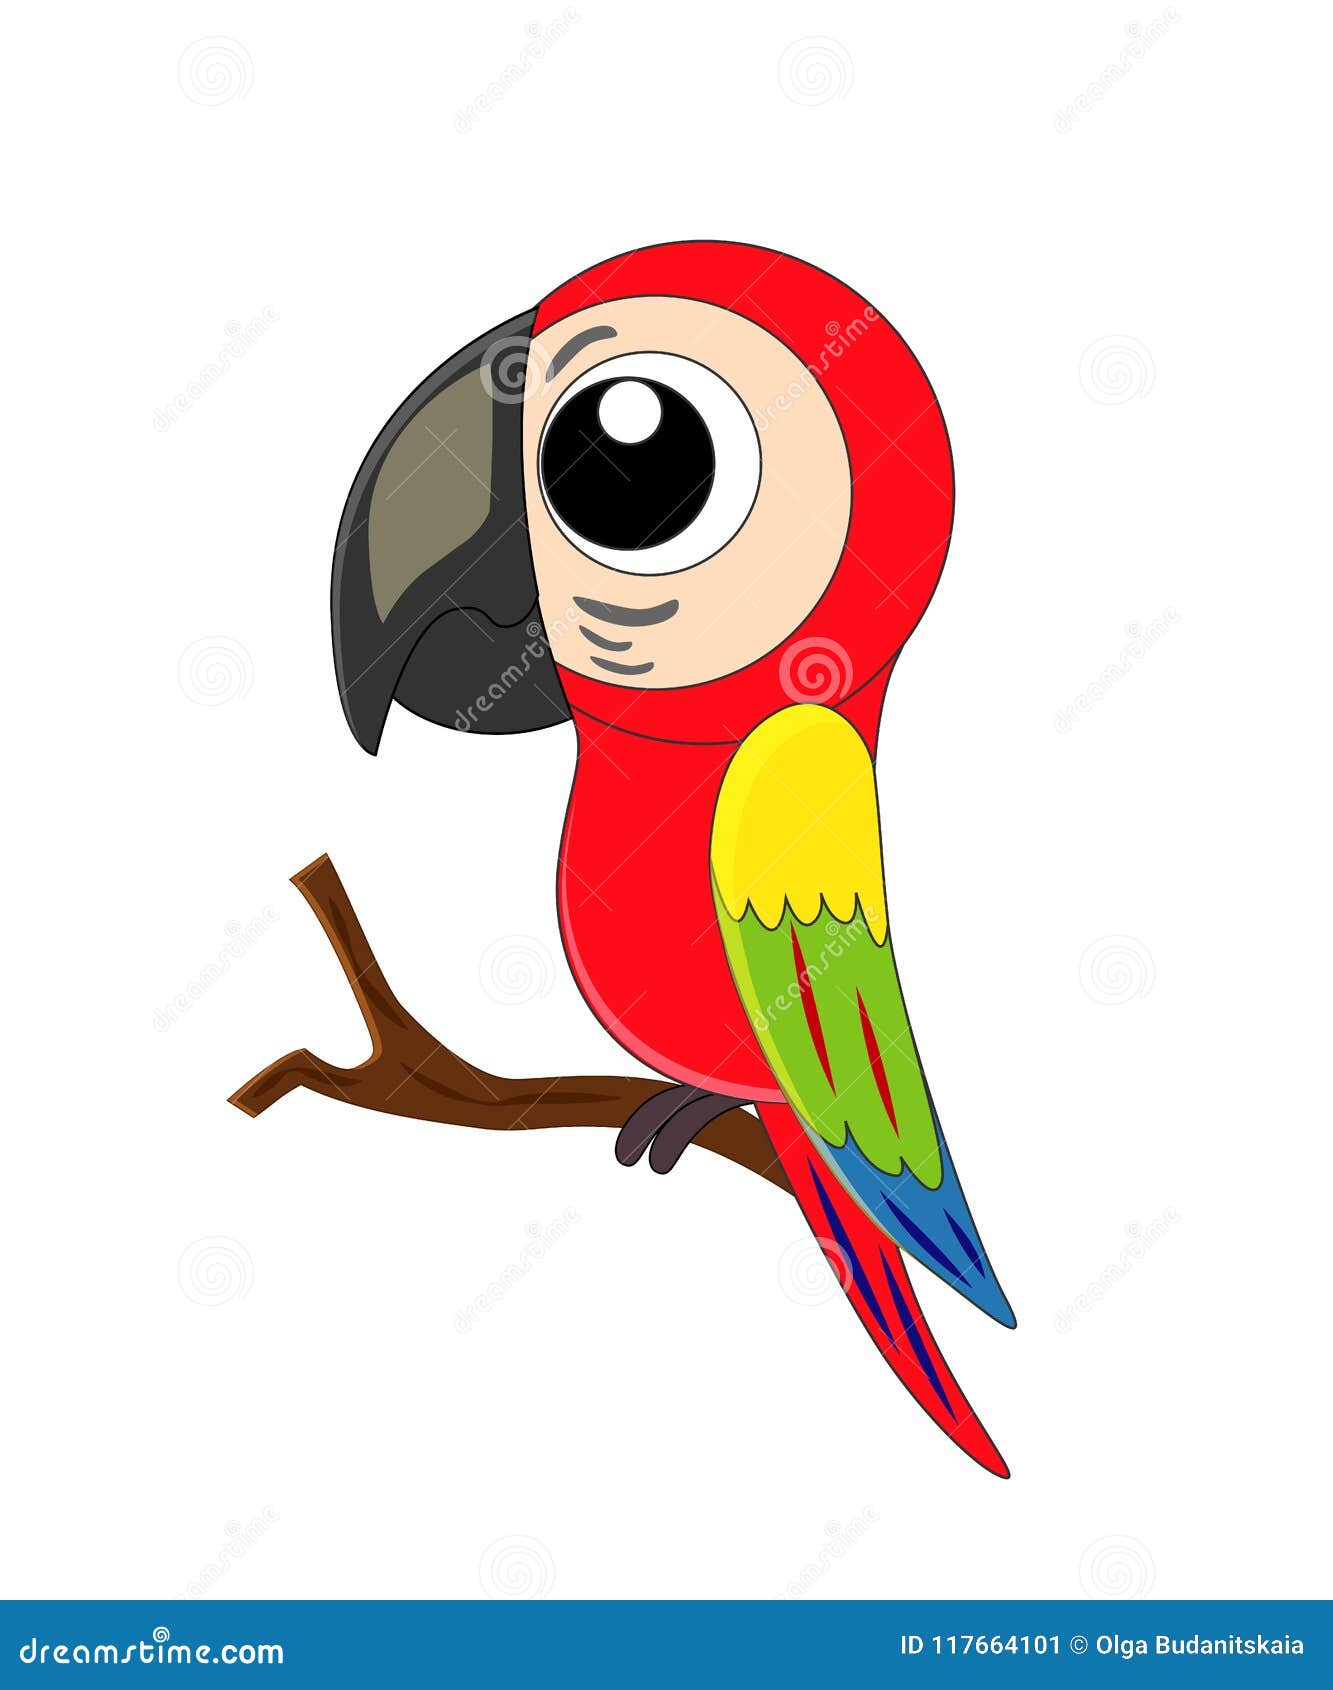 Cute Cartoon Parrot Vector Illustration Isolated on White ...